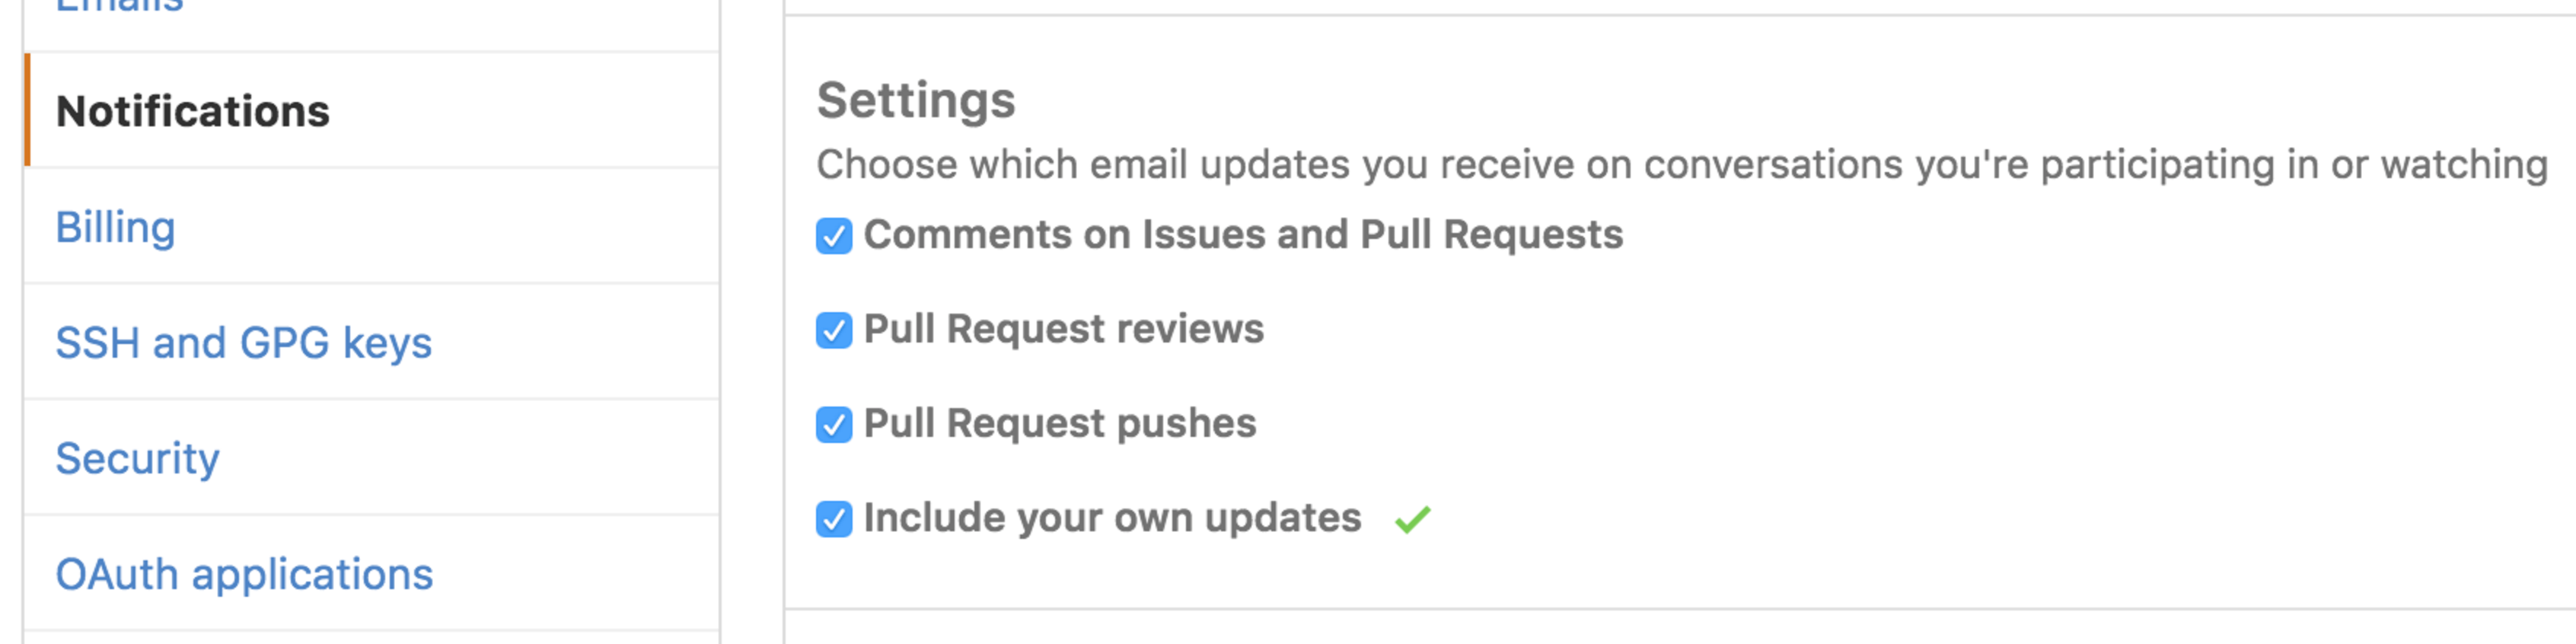 Different options for configuring the email notifications you receive